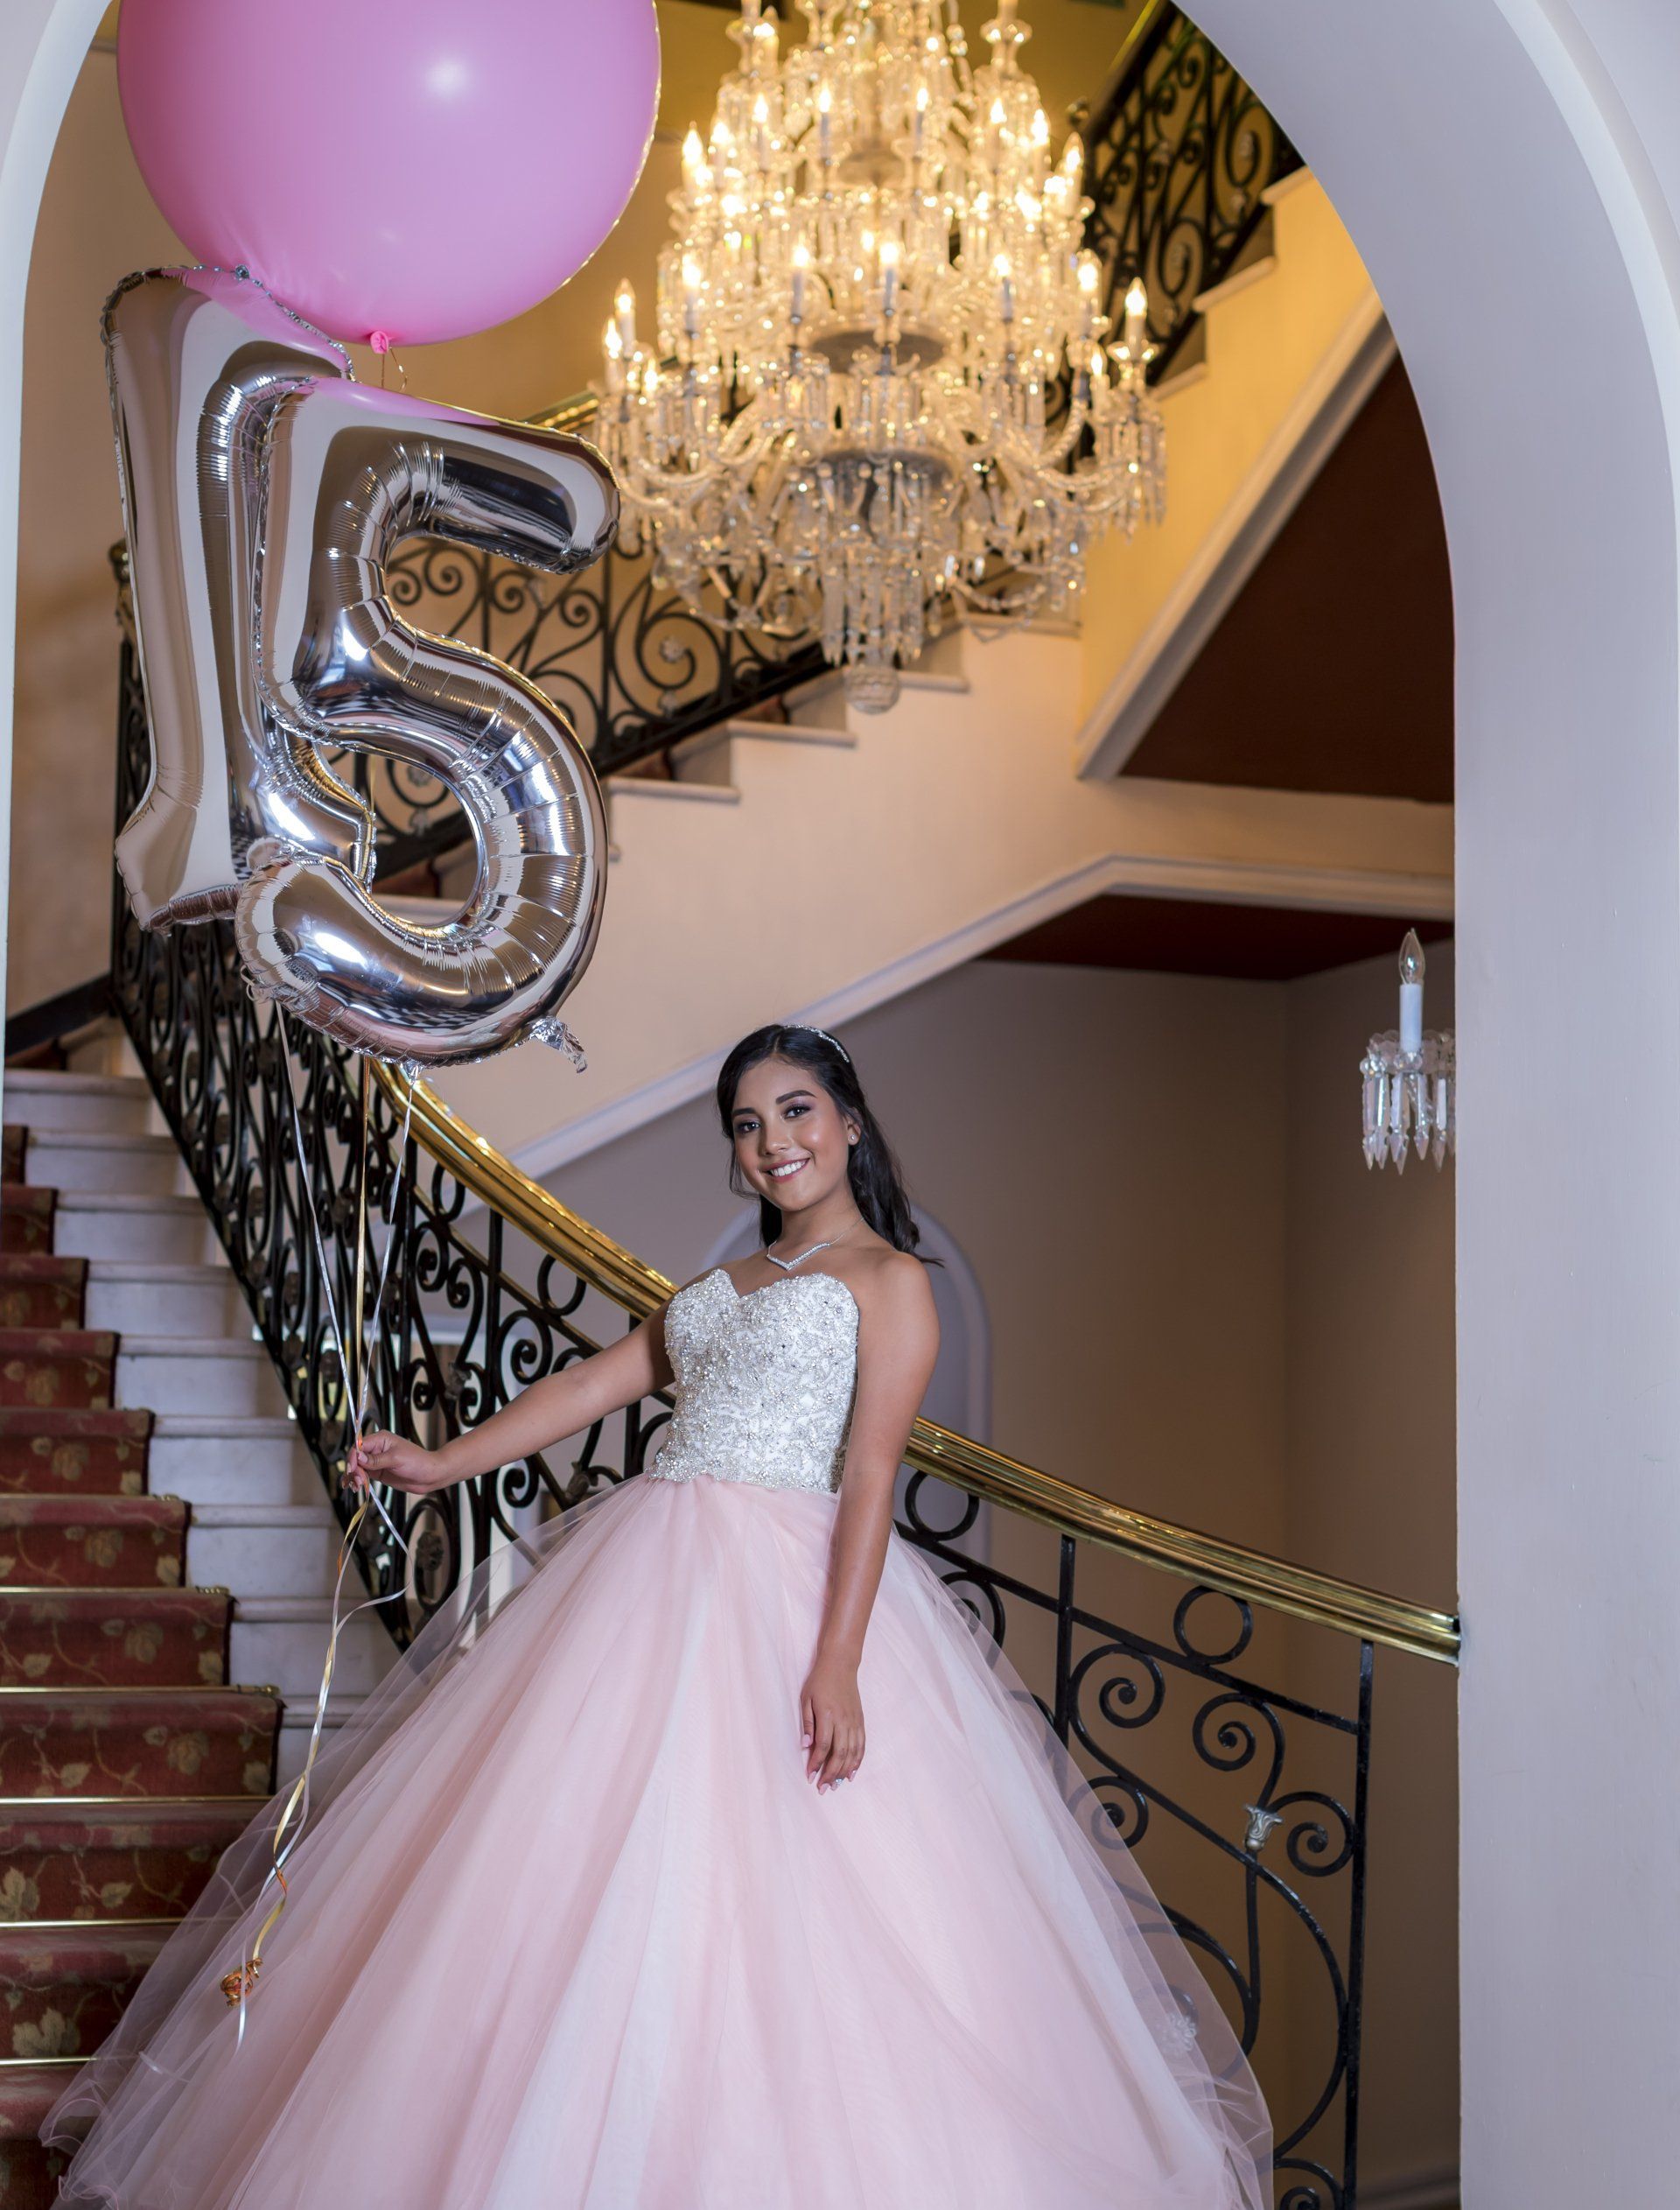 quinceanera 360 photo booth rental girl holding balloons